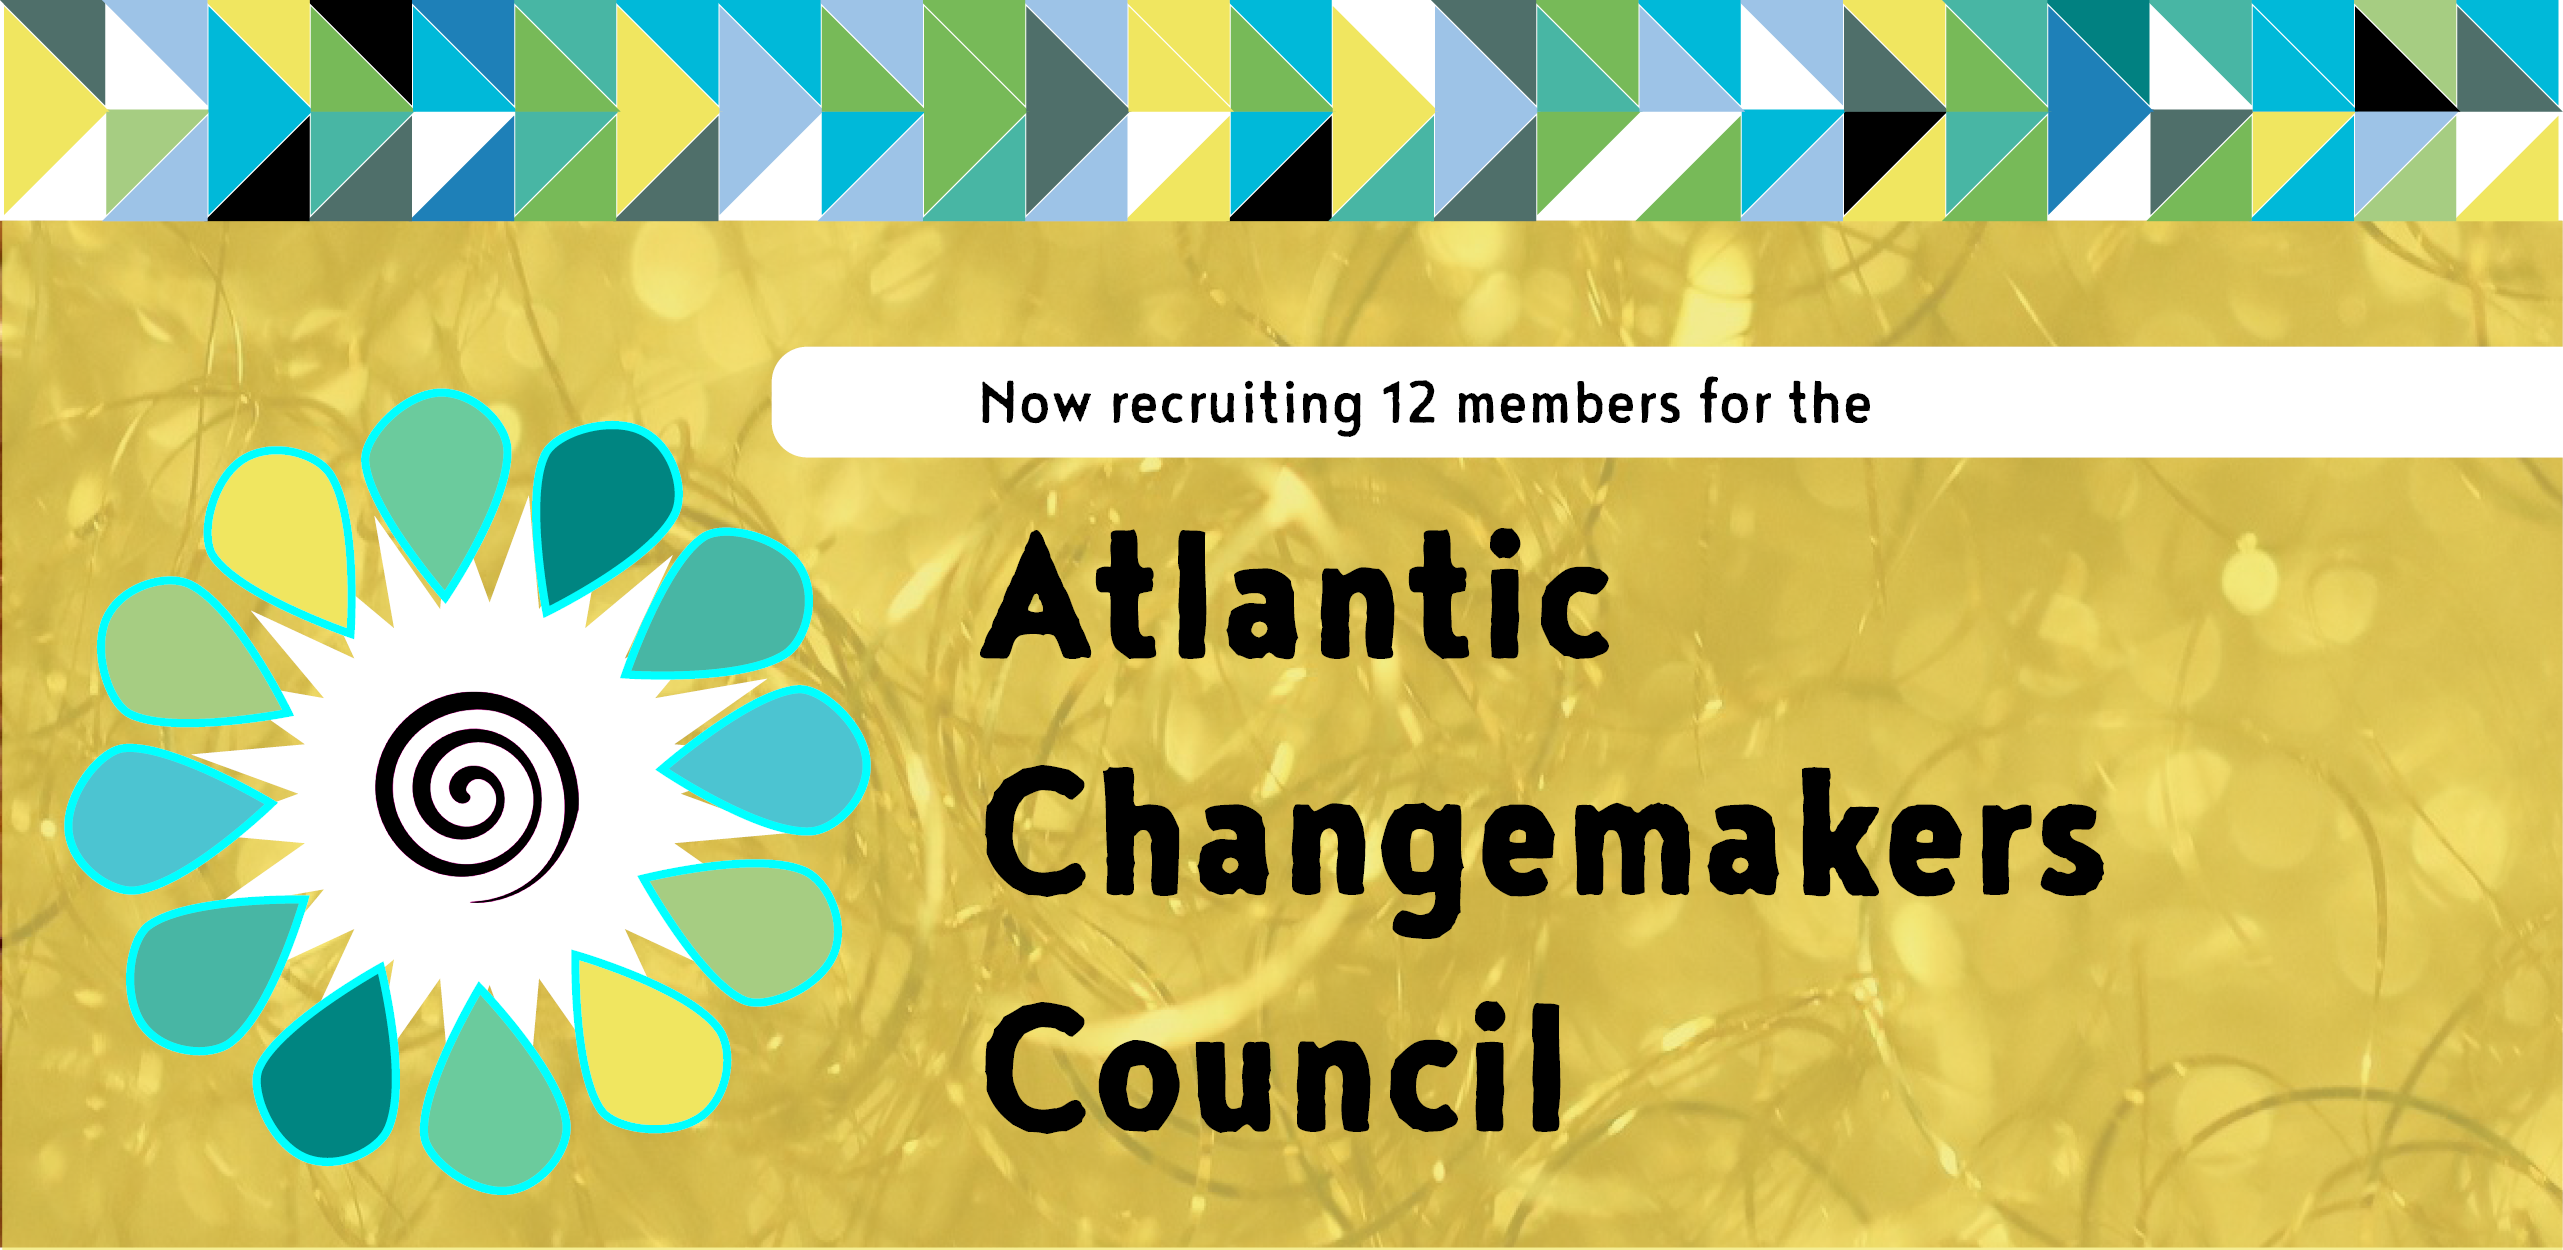 now recruiting for the Atlantic Changemakers Council.